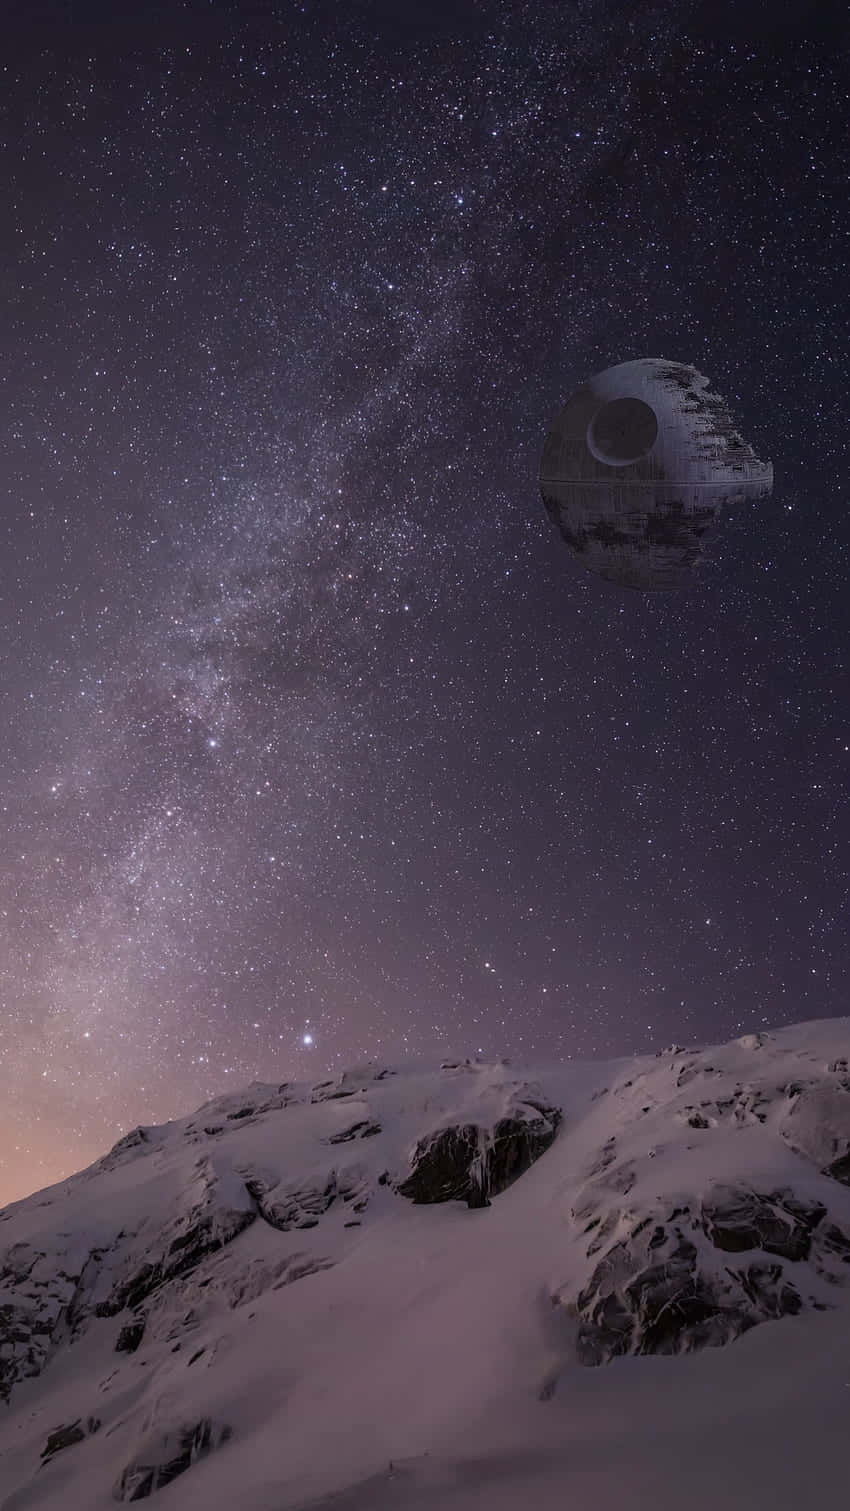 Death Star Over Snowy Mountain Nightscape Wallpaper